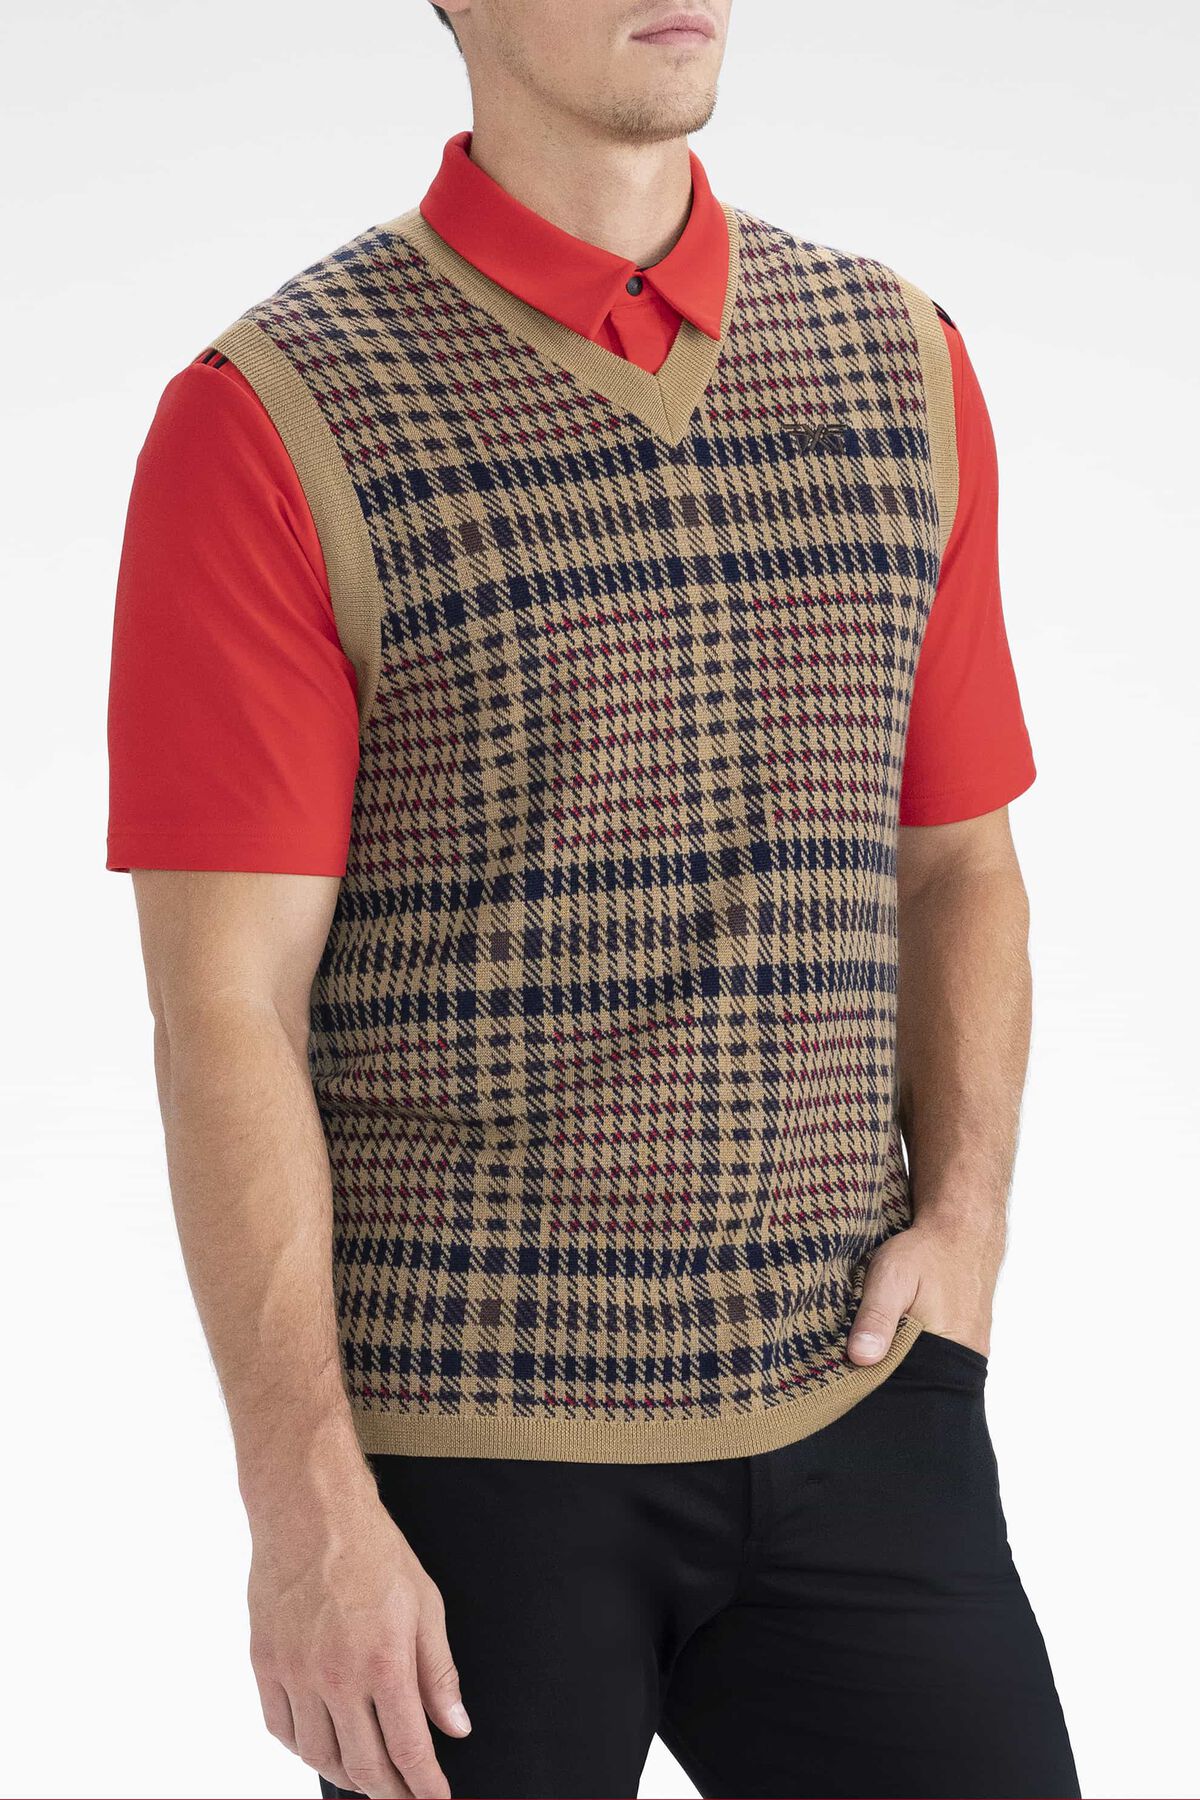 Underholde implicitte skorsten Plaid Sweater Vest | Shop the Highest Quality Golf Apparel, Gear,  Accessories and Golf Clubs at PXG